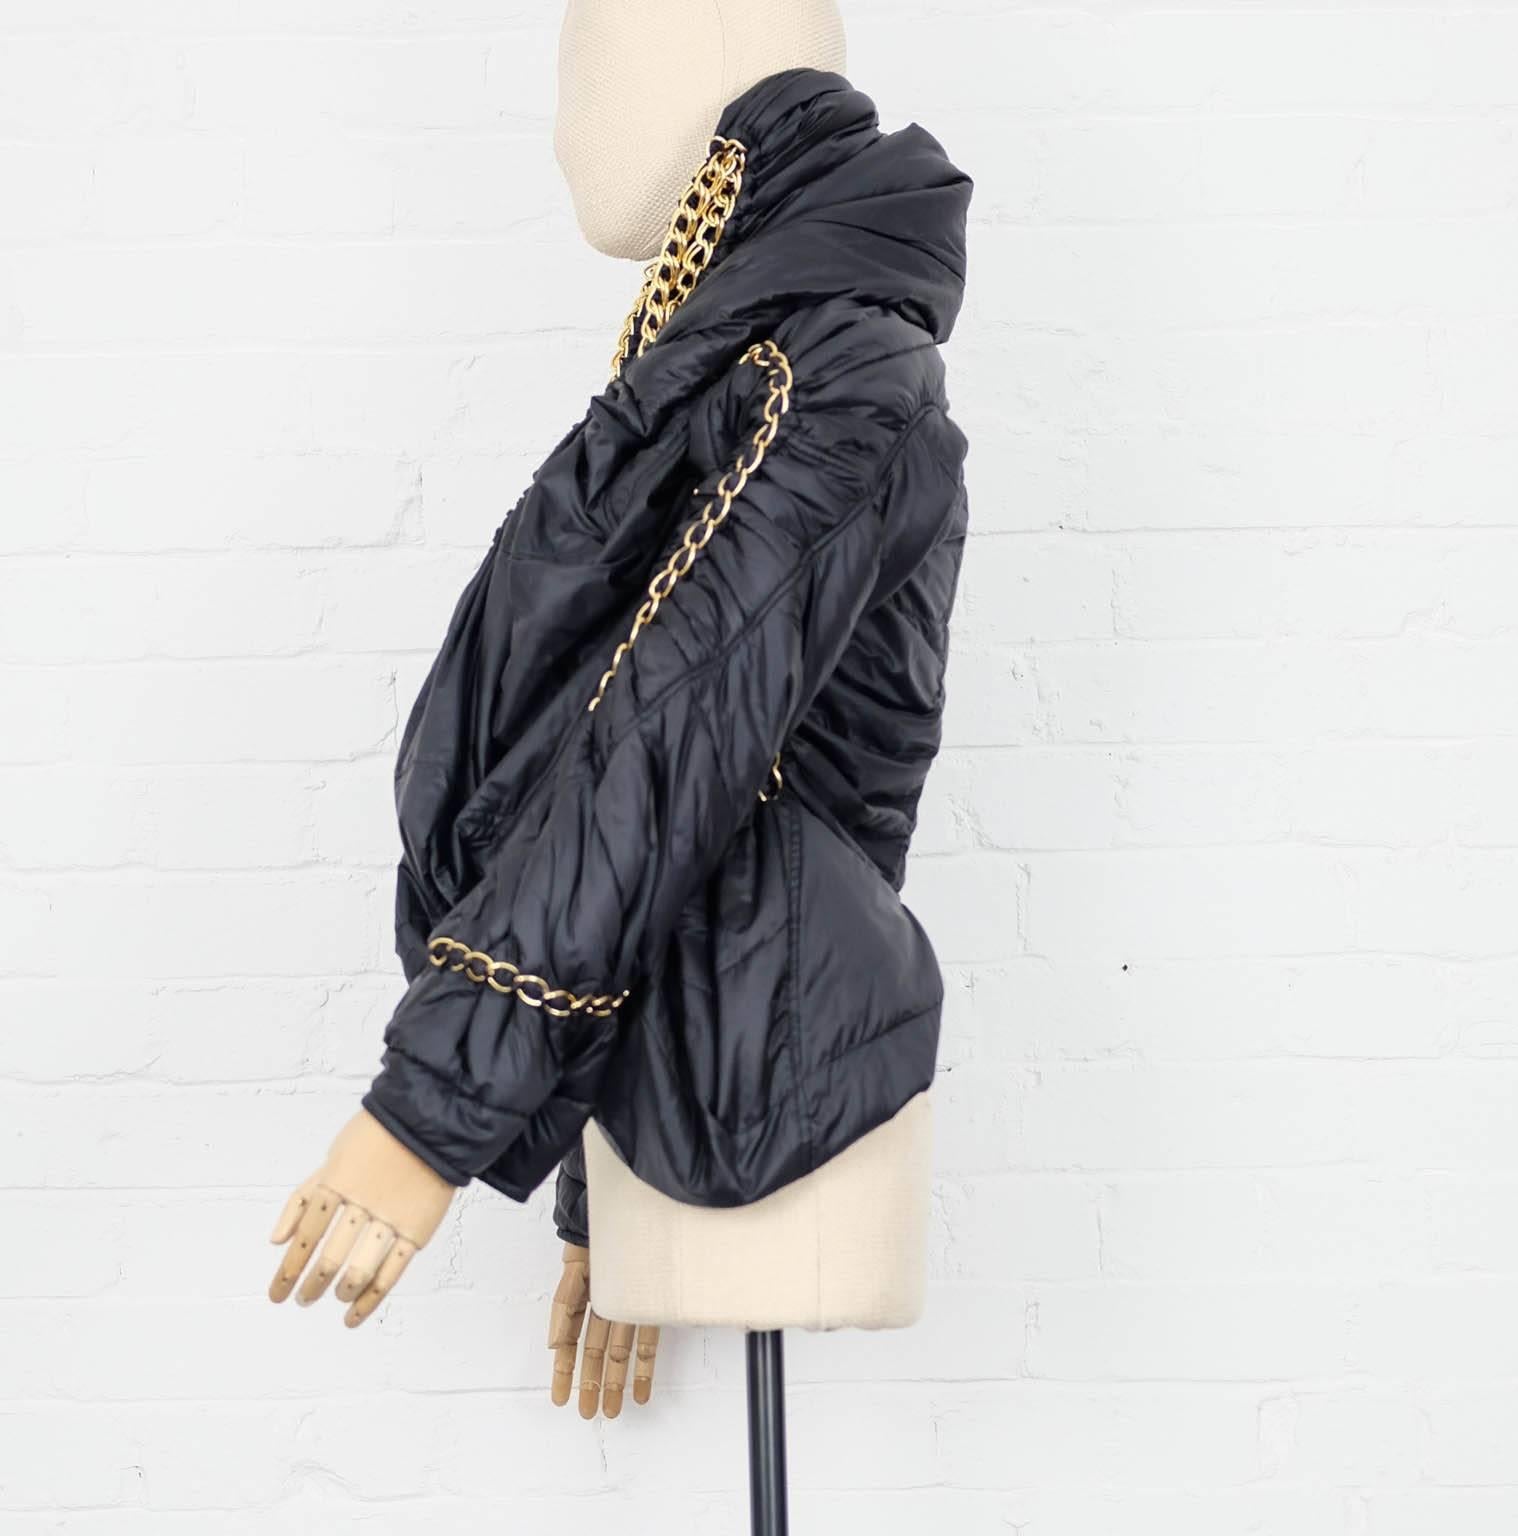 Junya Watanabe for Comme Des Garçons black draped puffer coat with gold chain trim - runway 2009 featuring a draped open front, long sleeves and a gold-tone chunky chain detail running across the piece. In excellent condition.


Mesurements:
Bust: